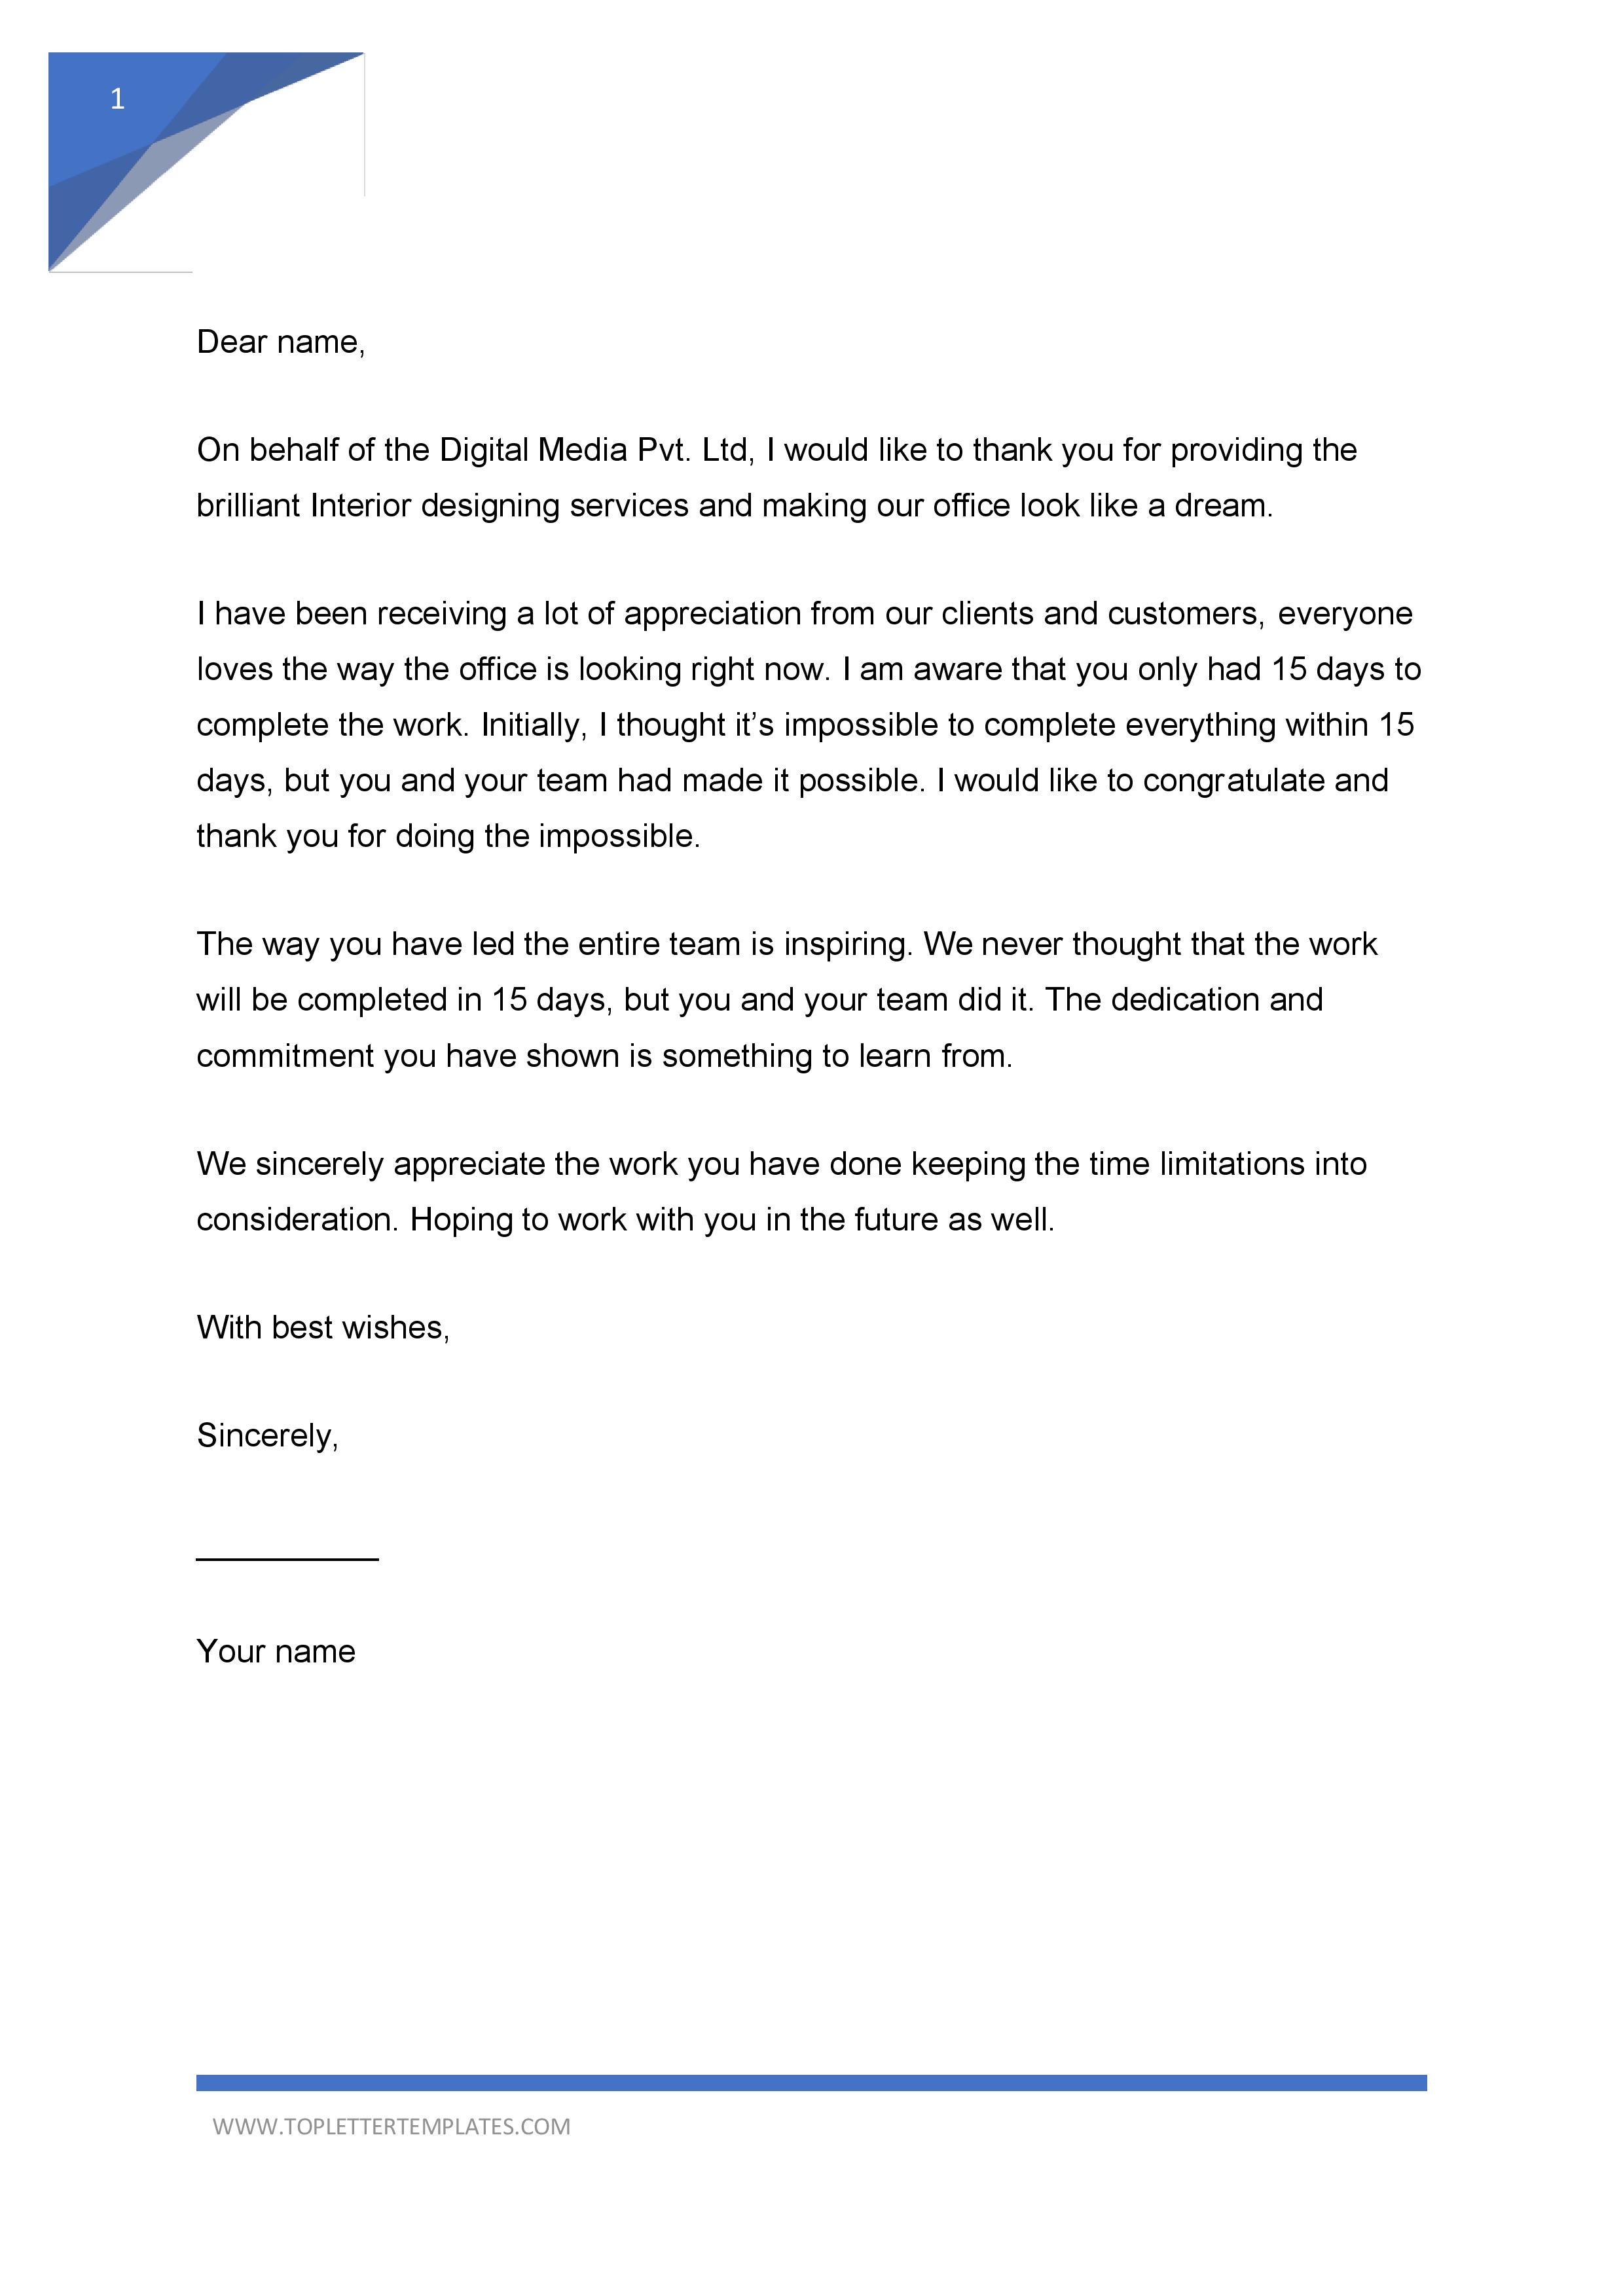 Appreciation Letter for Good Service - PDF, Word - Top Letter Templates